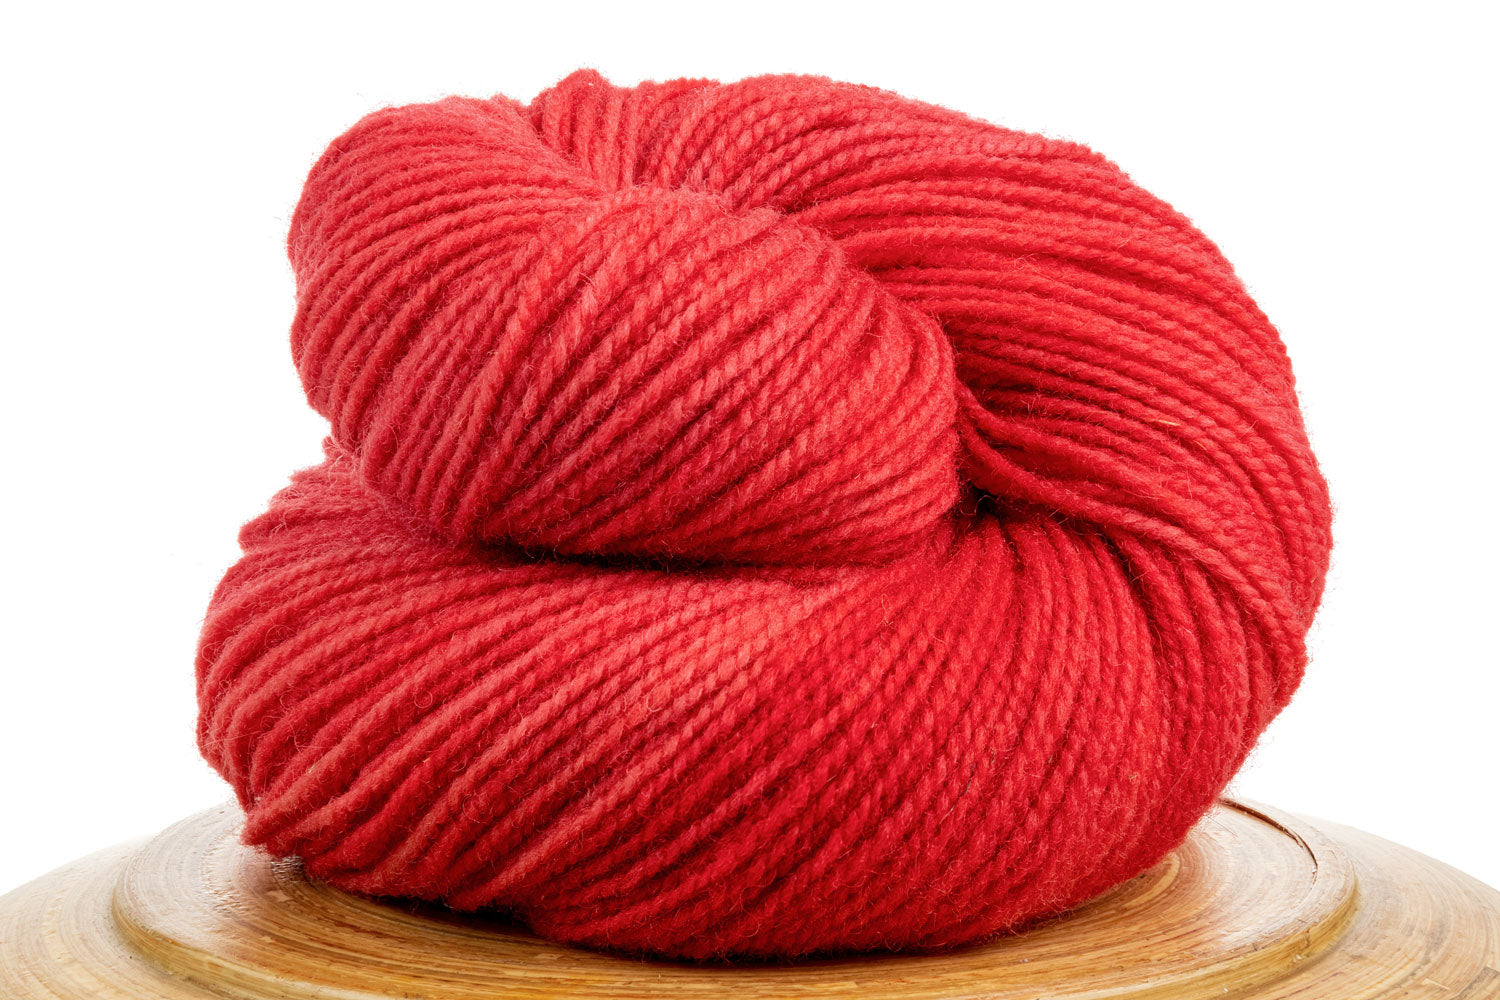 Winfield Canadian hand-dyed wool yarn in Strawberry Gelato, a bright warm pink